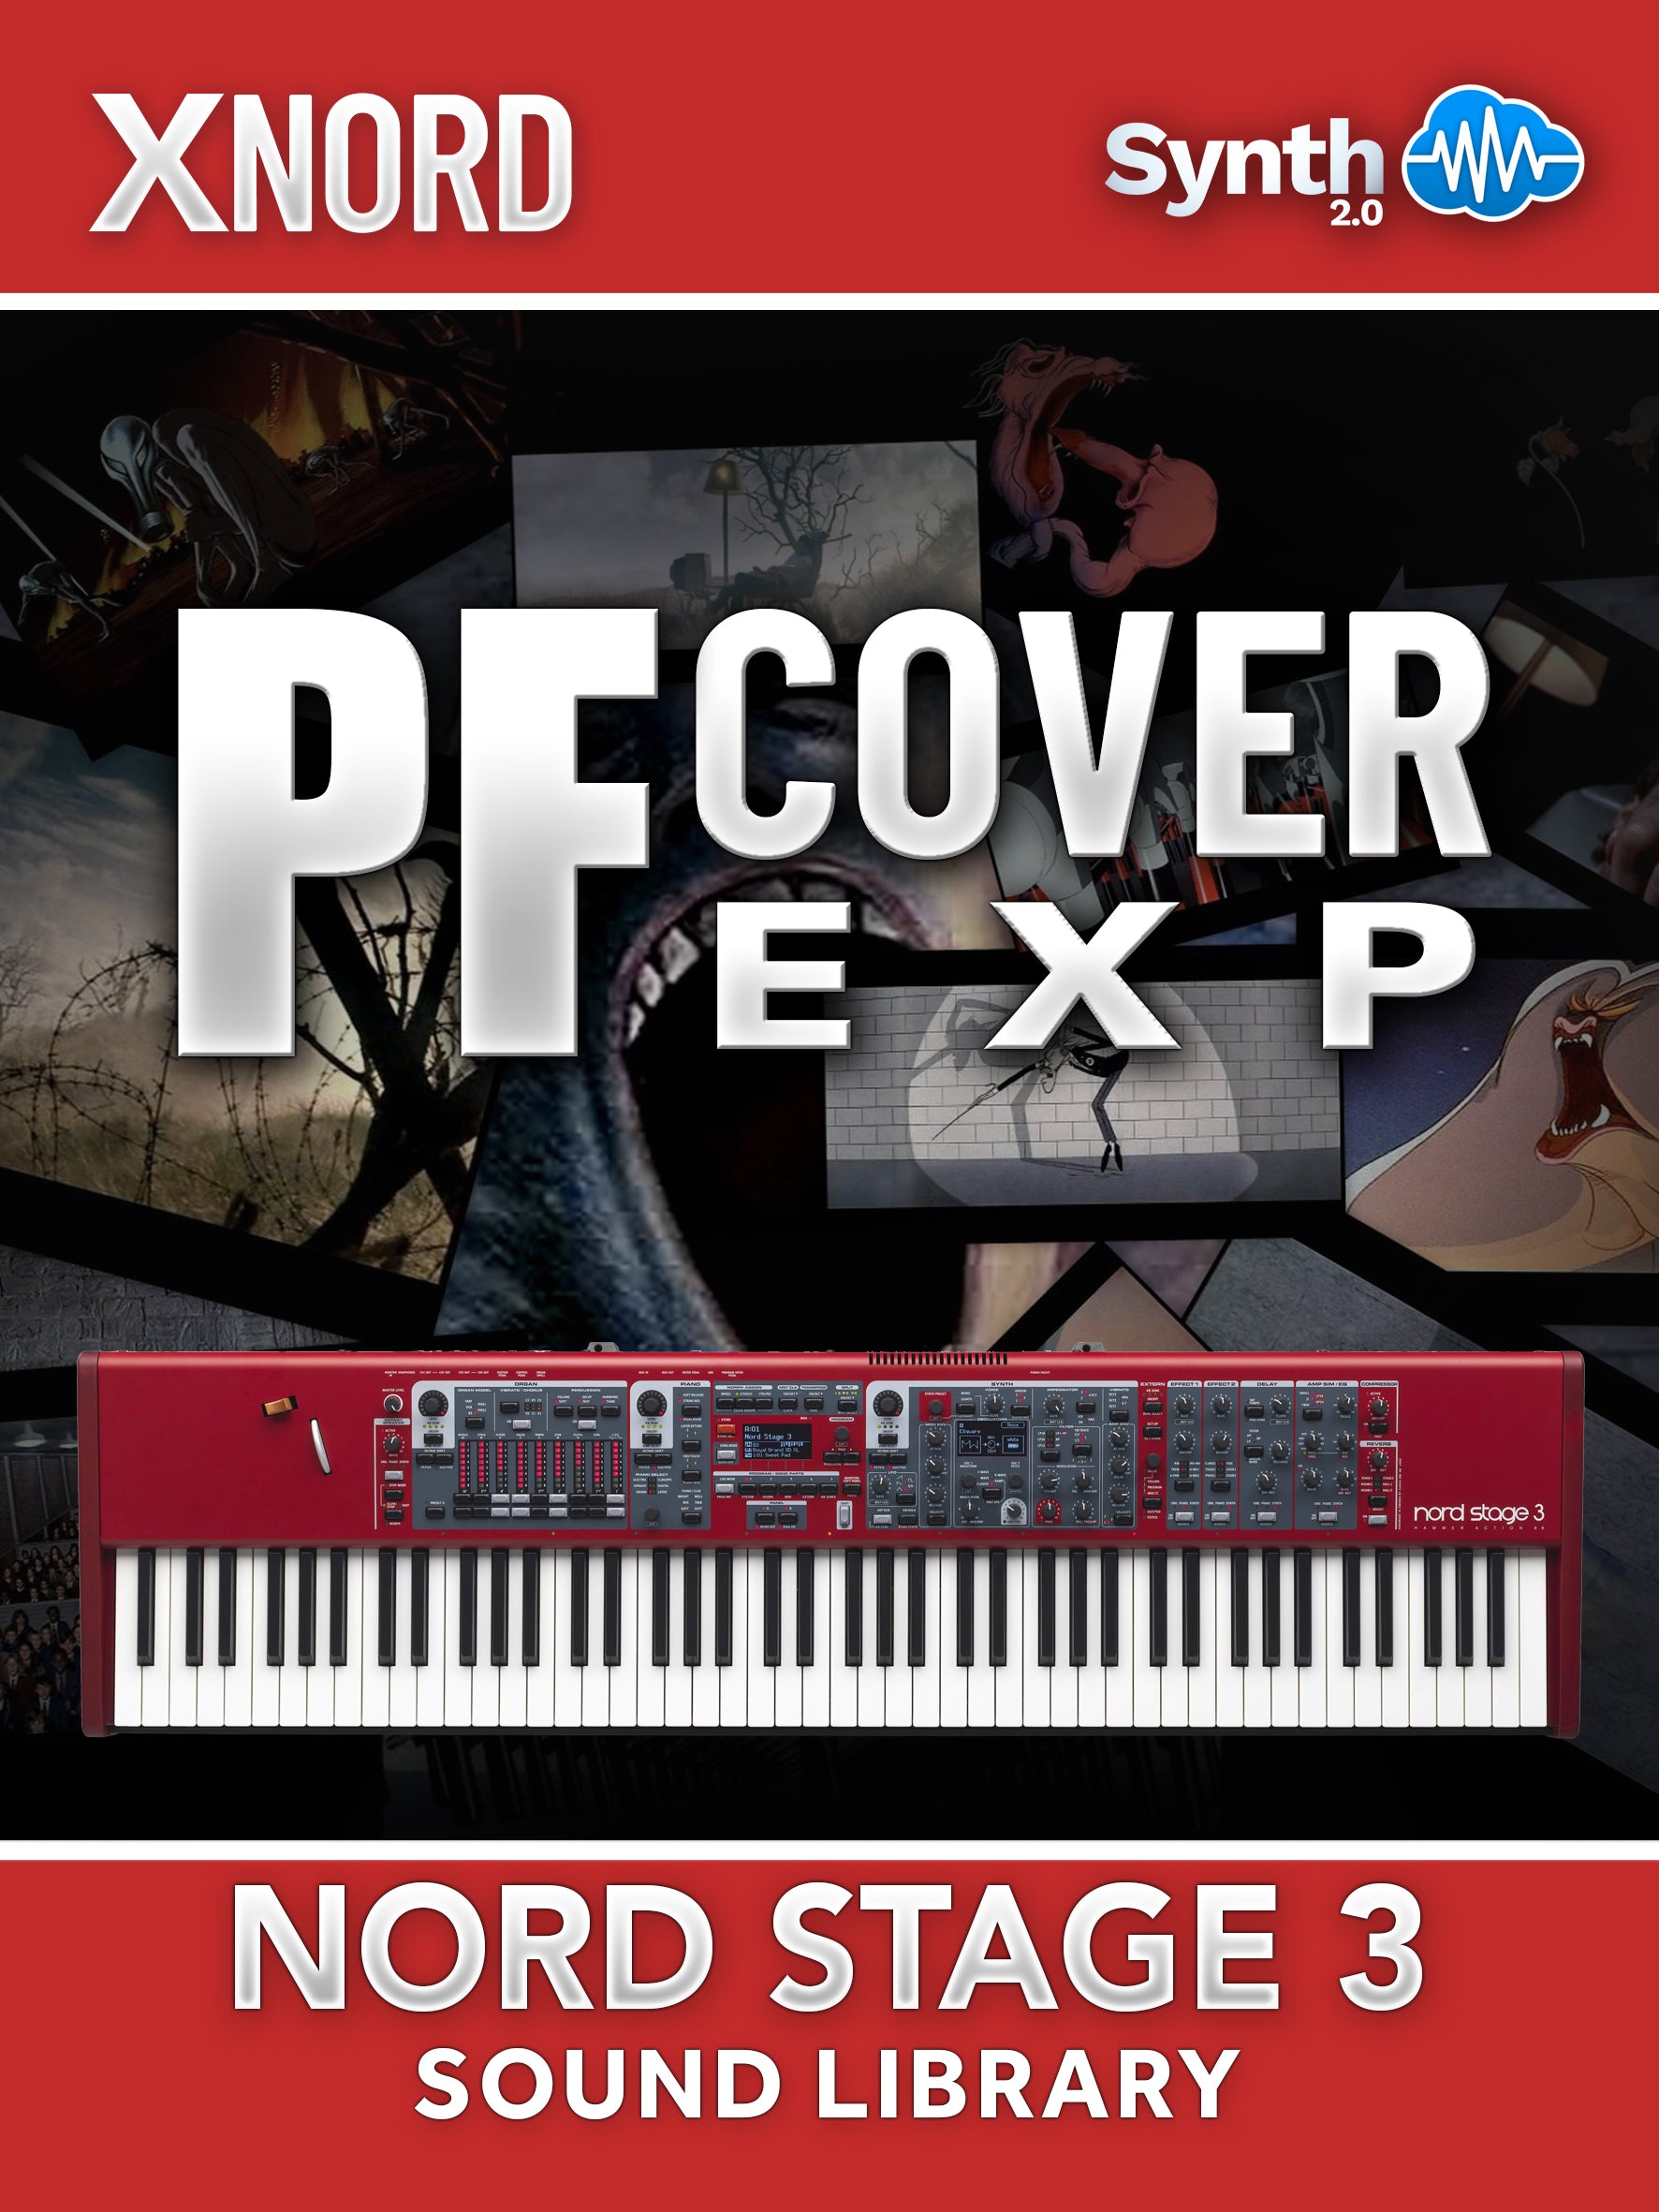 FPL004 - PF Cover EXP - Nord Stage 3 ( 41 presets )